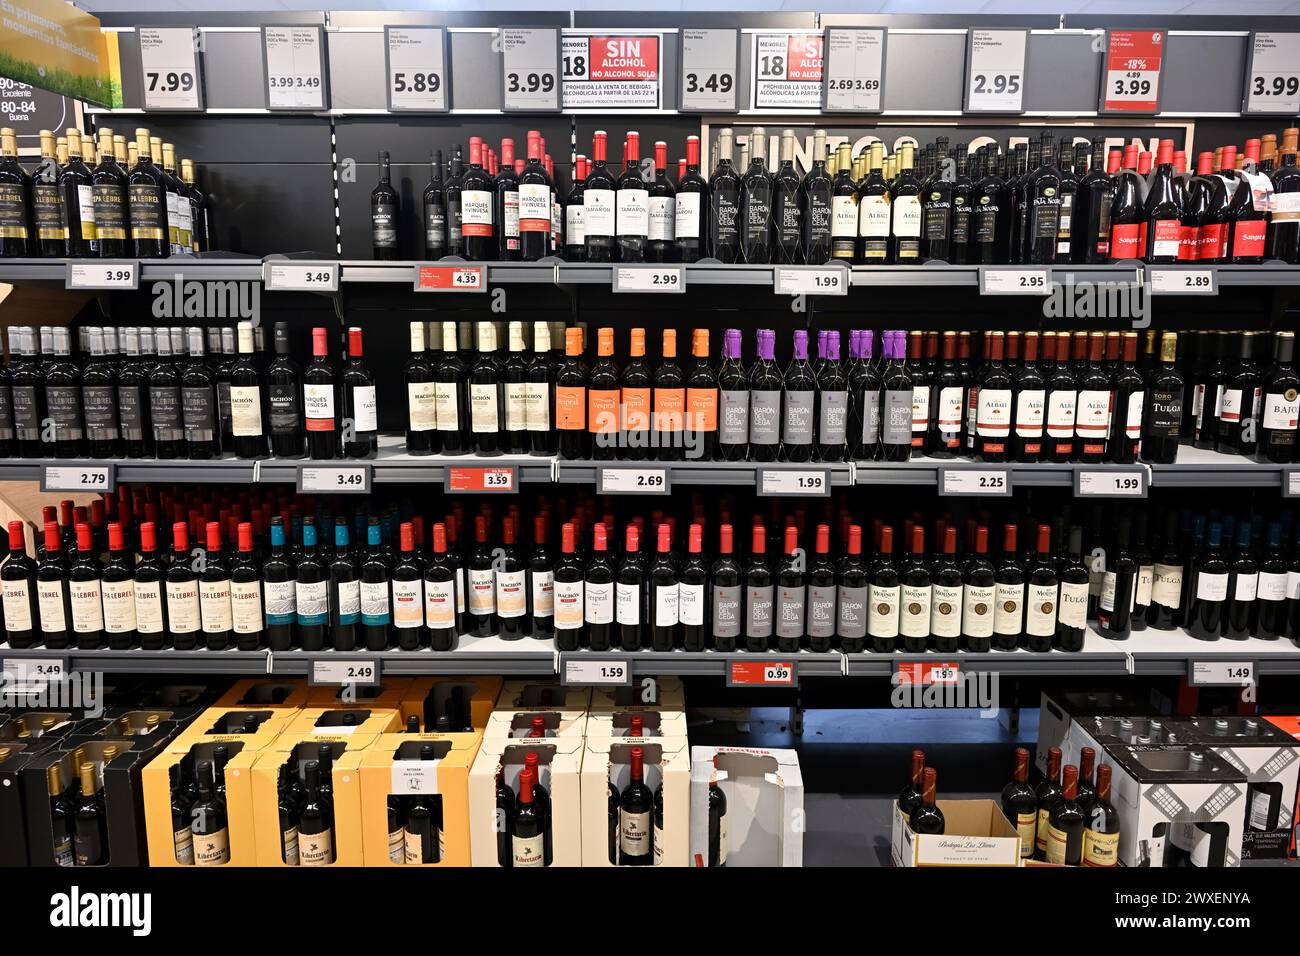 Shelves full of wine bottles in Lidl supermarket with prices, Spain Stock Photo